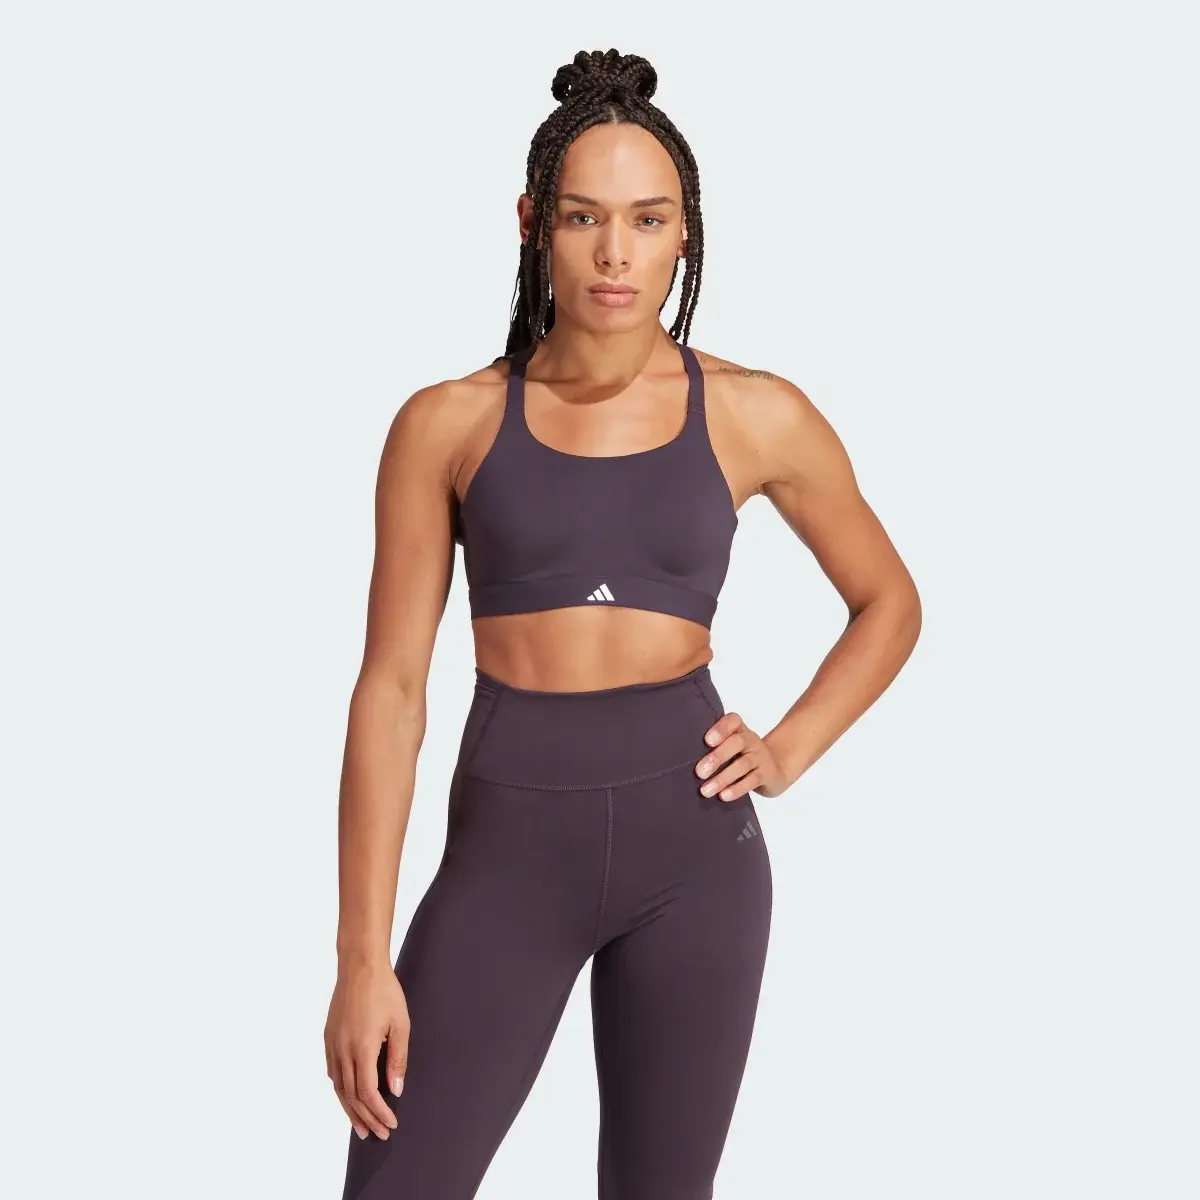 Adidas Brassière de training TLRD Impact Luxe Maintien fort. 2